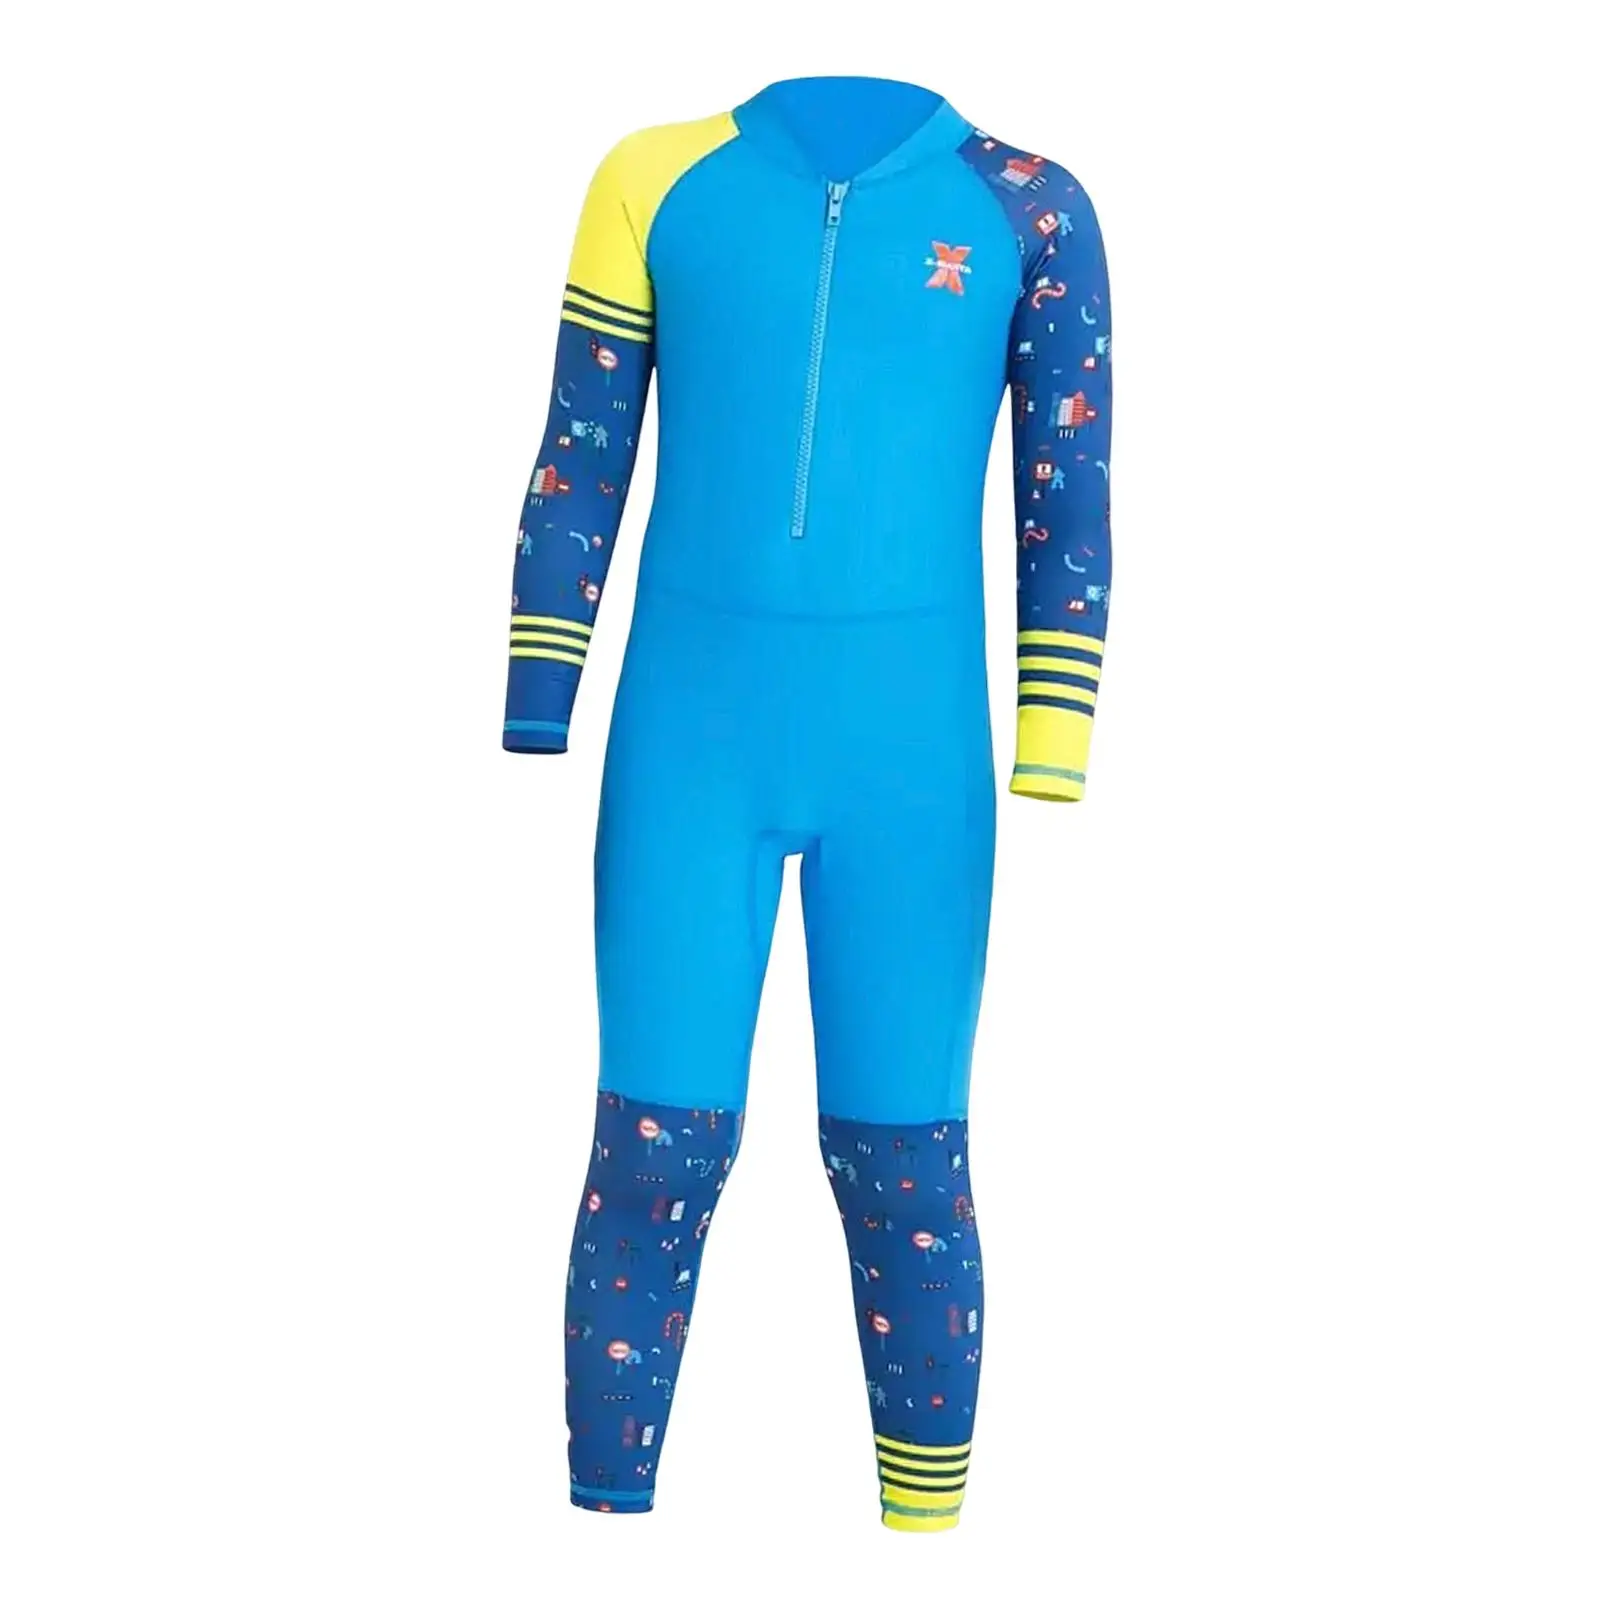 Kids Wetsuit Diving Swimsuits Keep Warm Long Sleeve Water Resistant Thermal Full suits for Kayak Canoeing Swimming Boys Girls